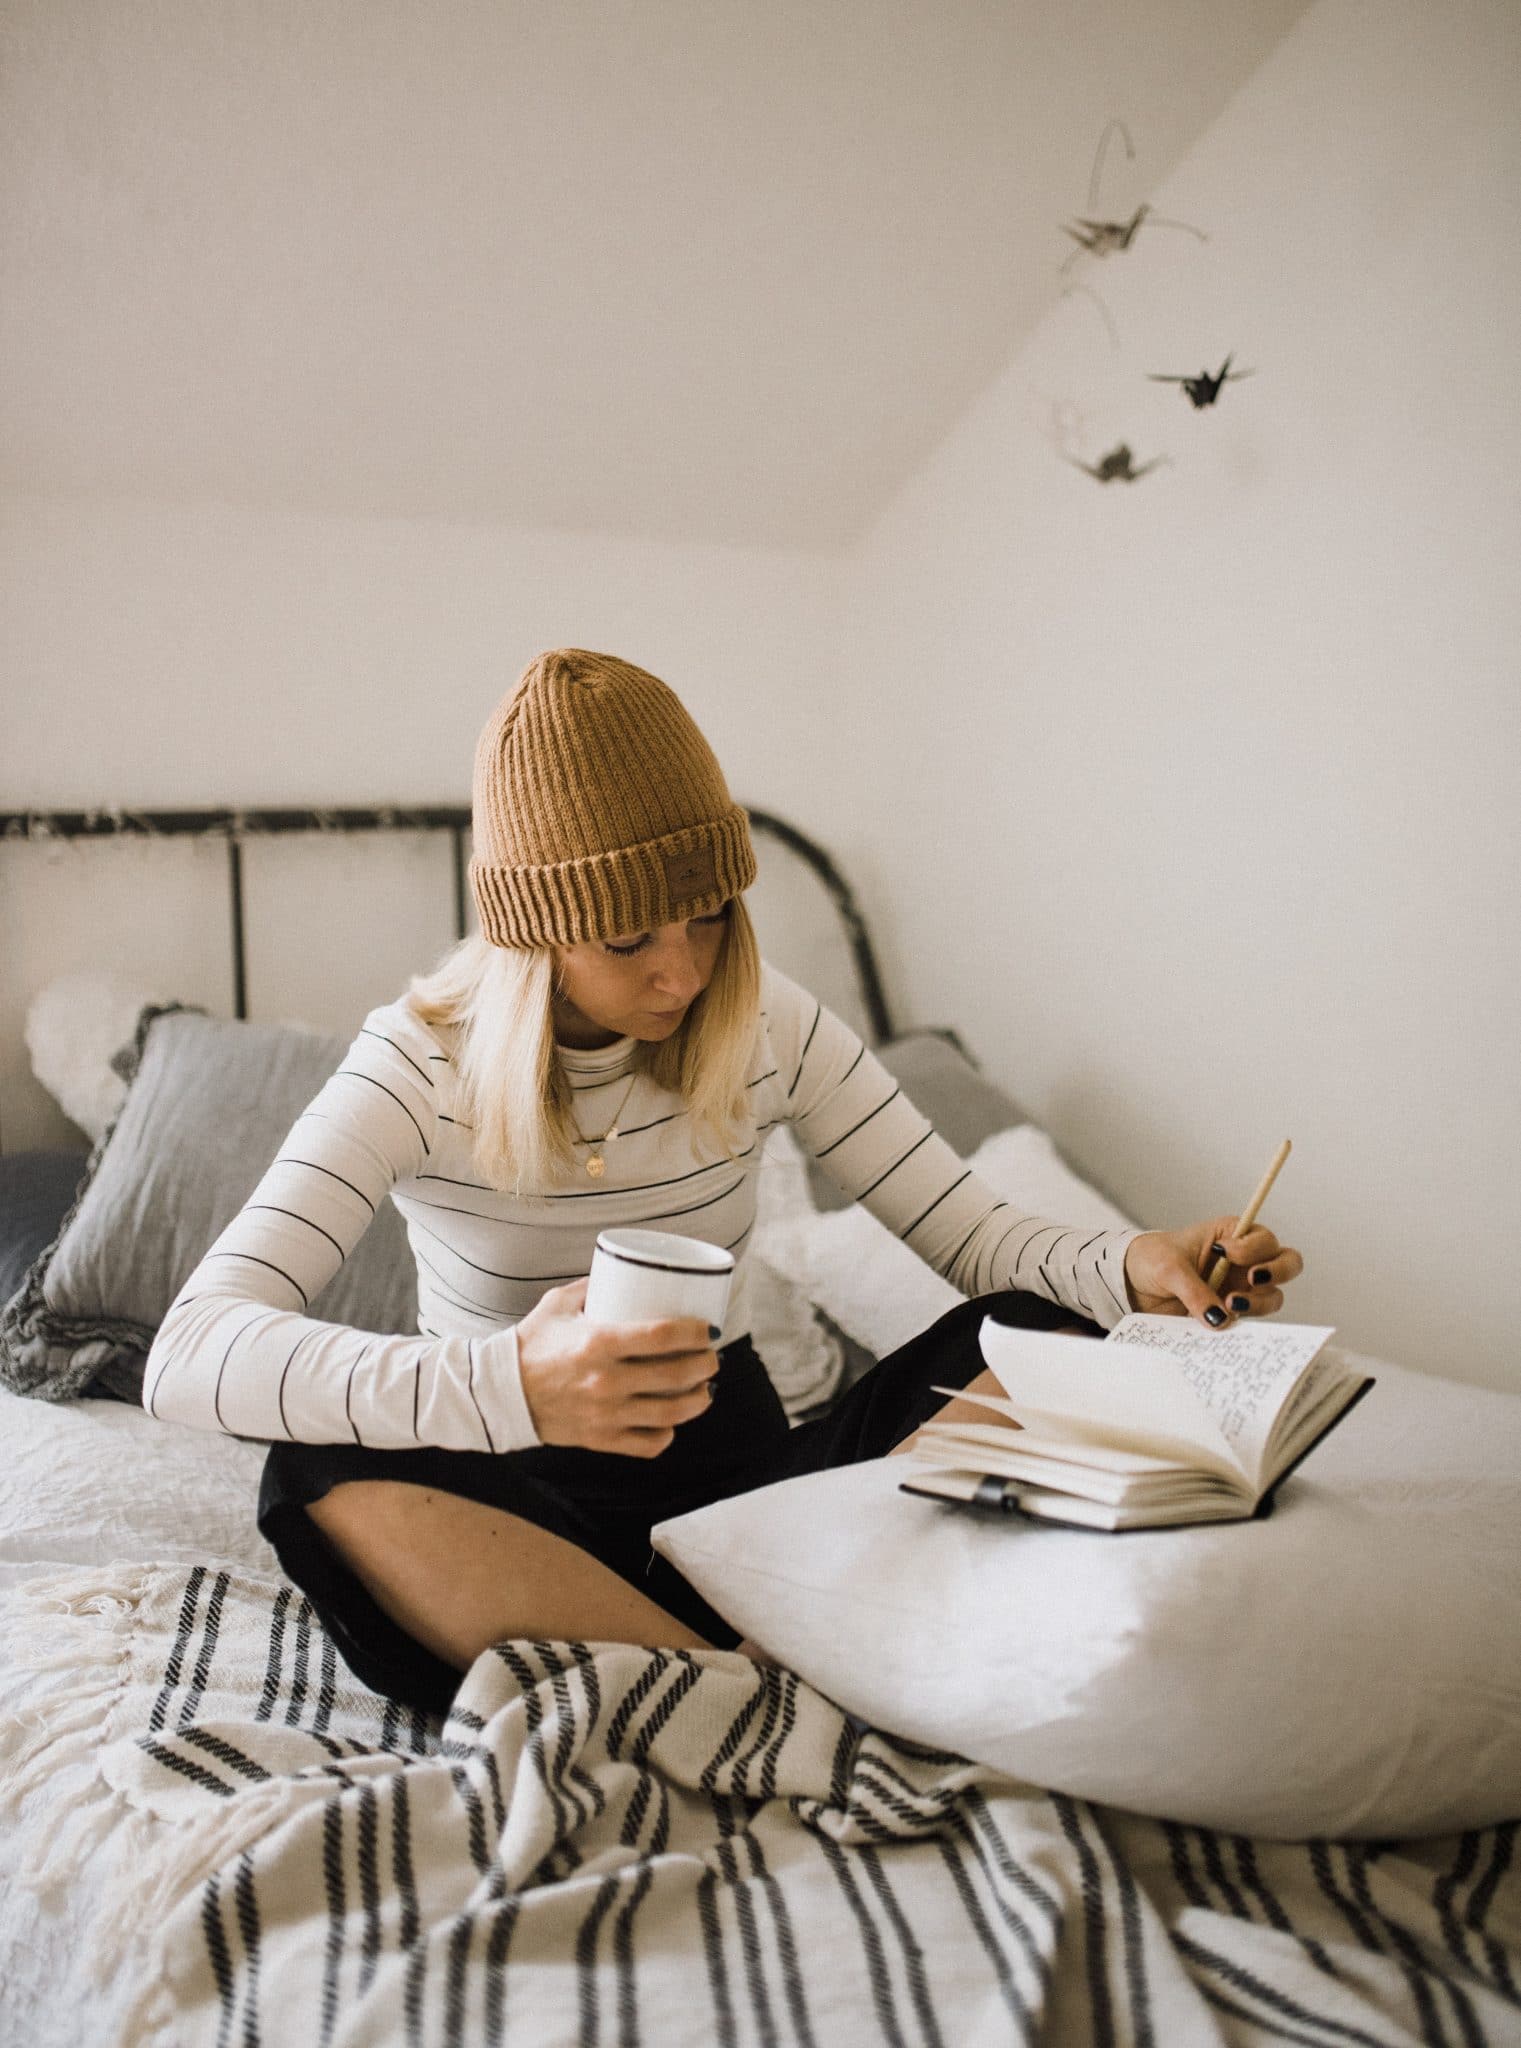 Woman sitting on her bed writing while holding a coffee mug.